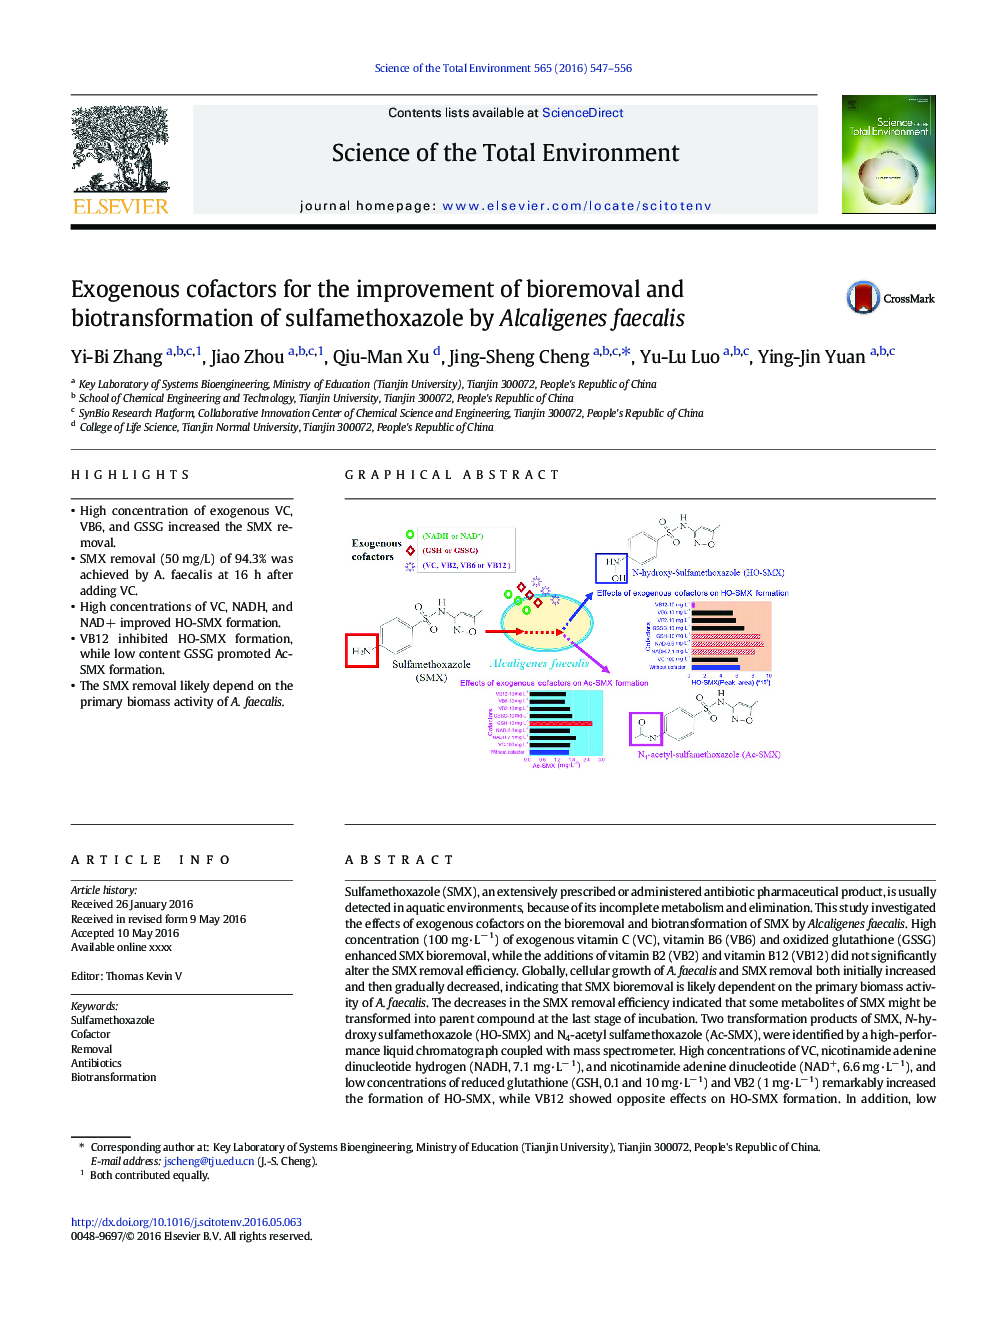 Exogenous cofactors for the improvement of bioremoval and biotransformation of sulfamethoxazole by Alcaligenes faecalis